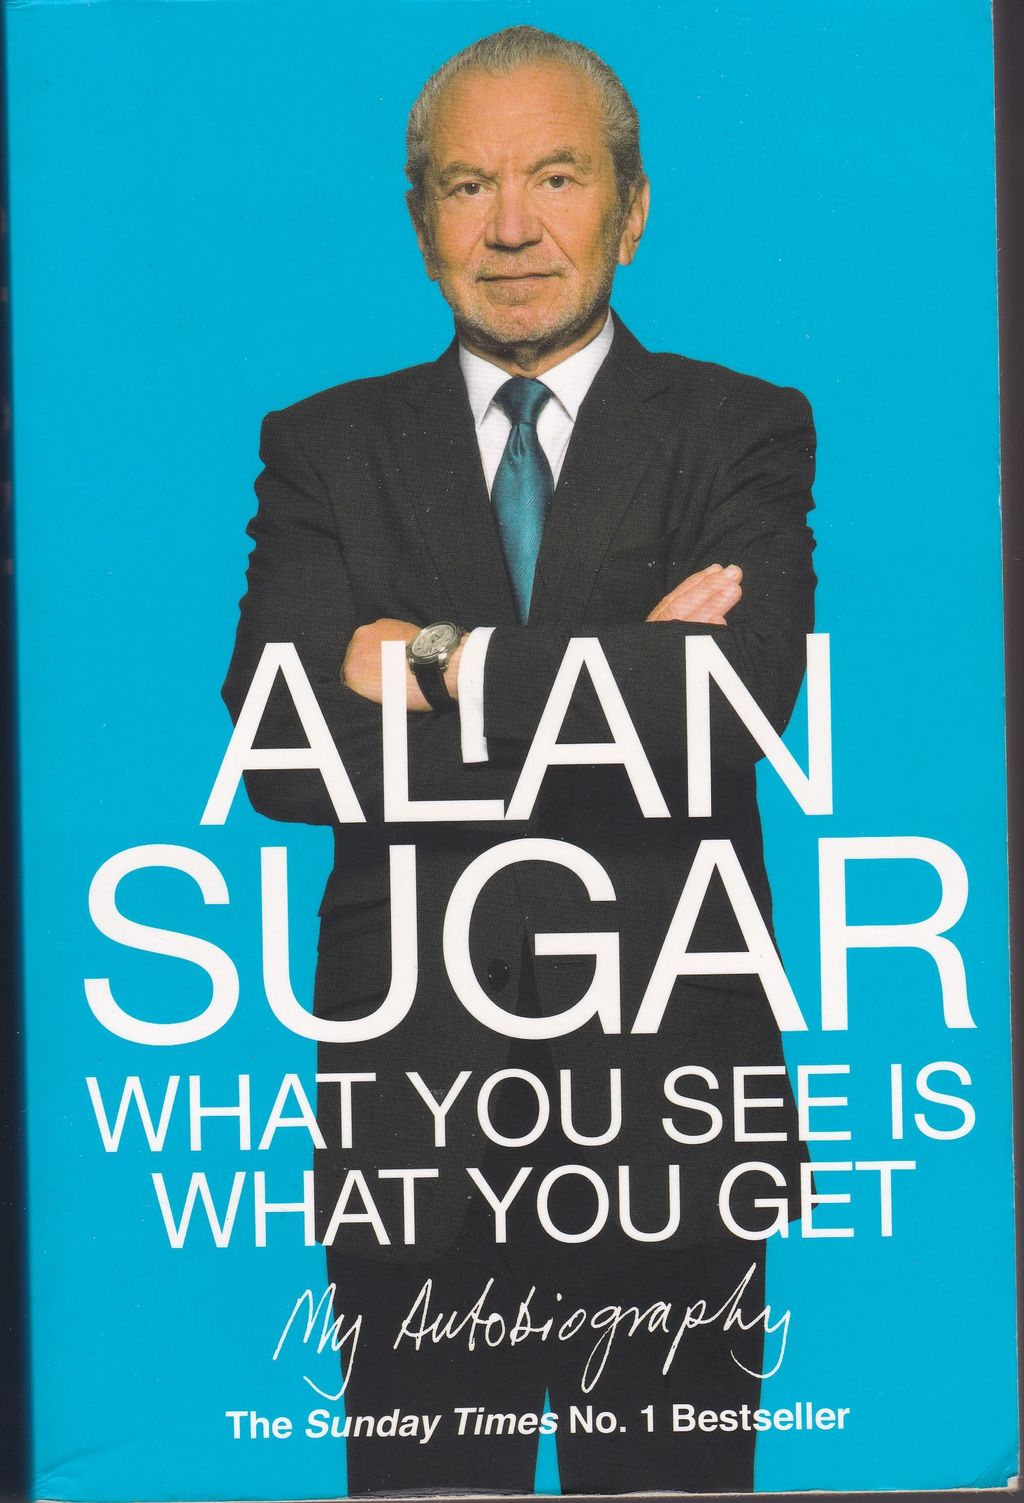 What you see is why you get, Lord Alan Michael Sugar's biography